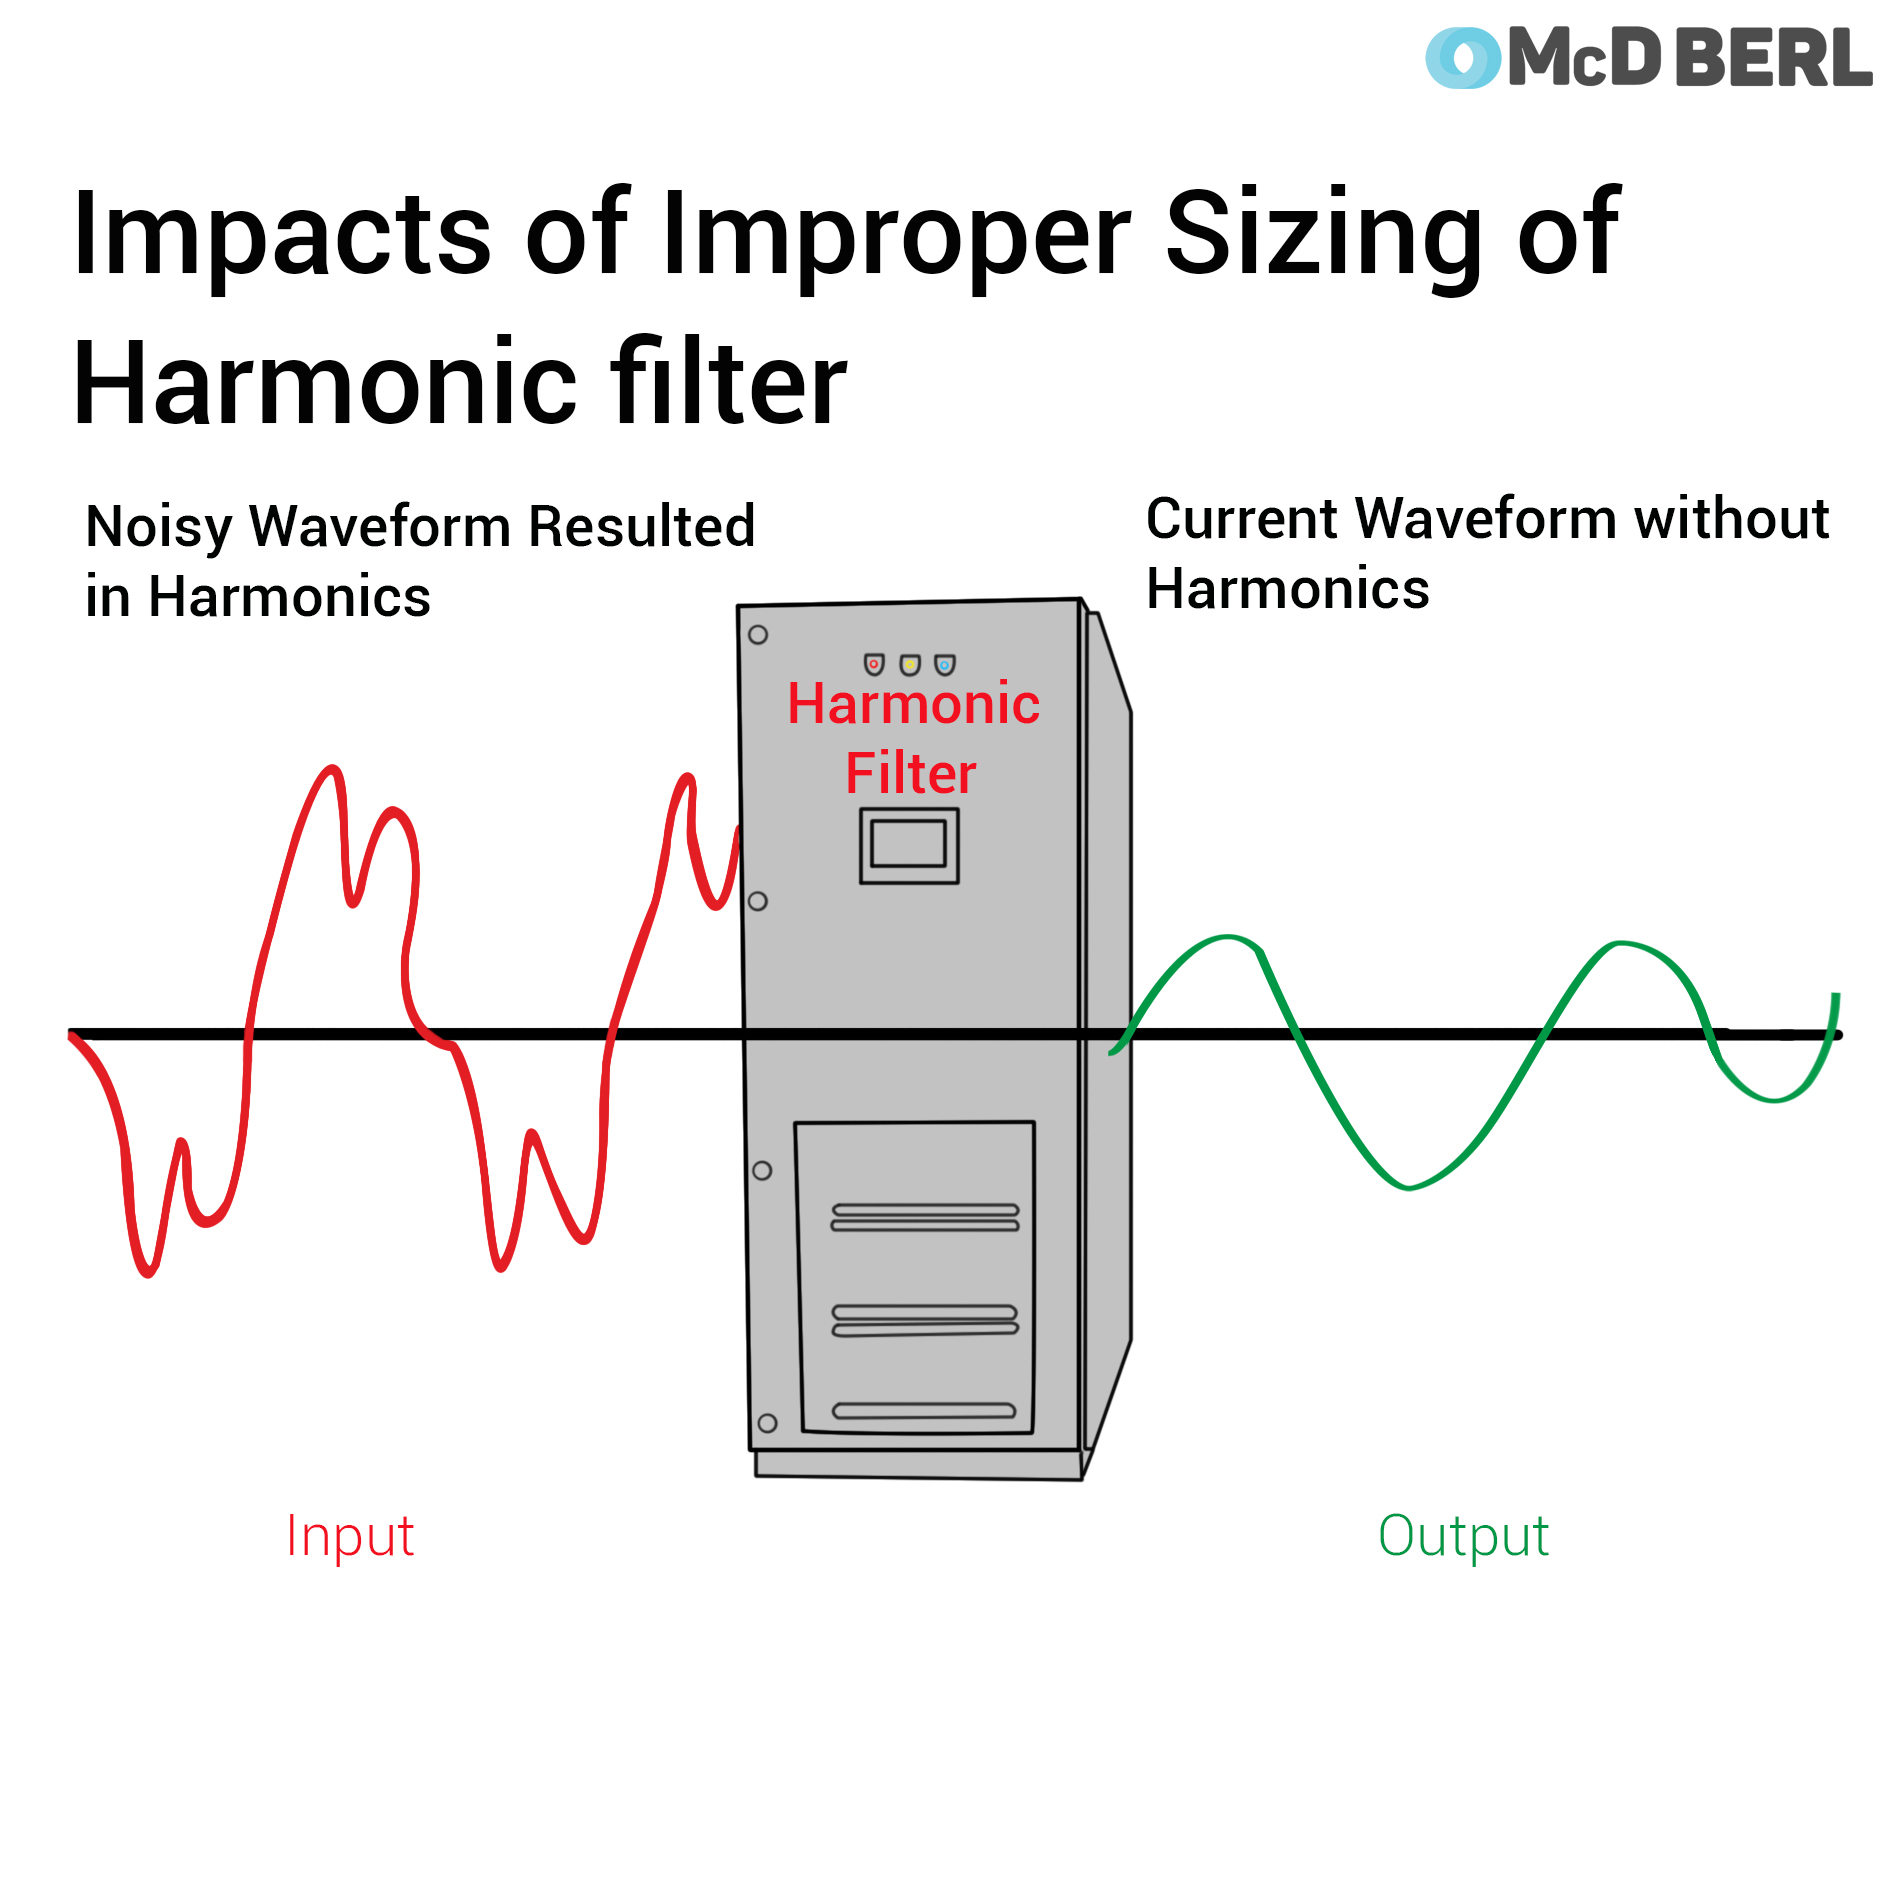 Active Harmonic Filter prevents risks and losses